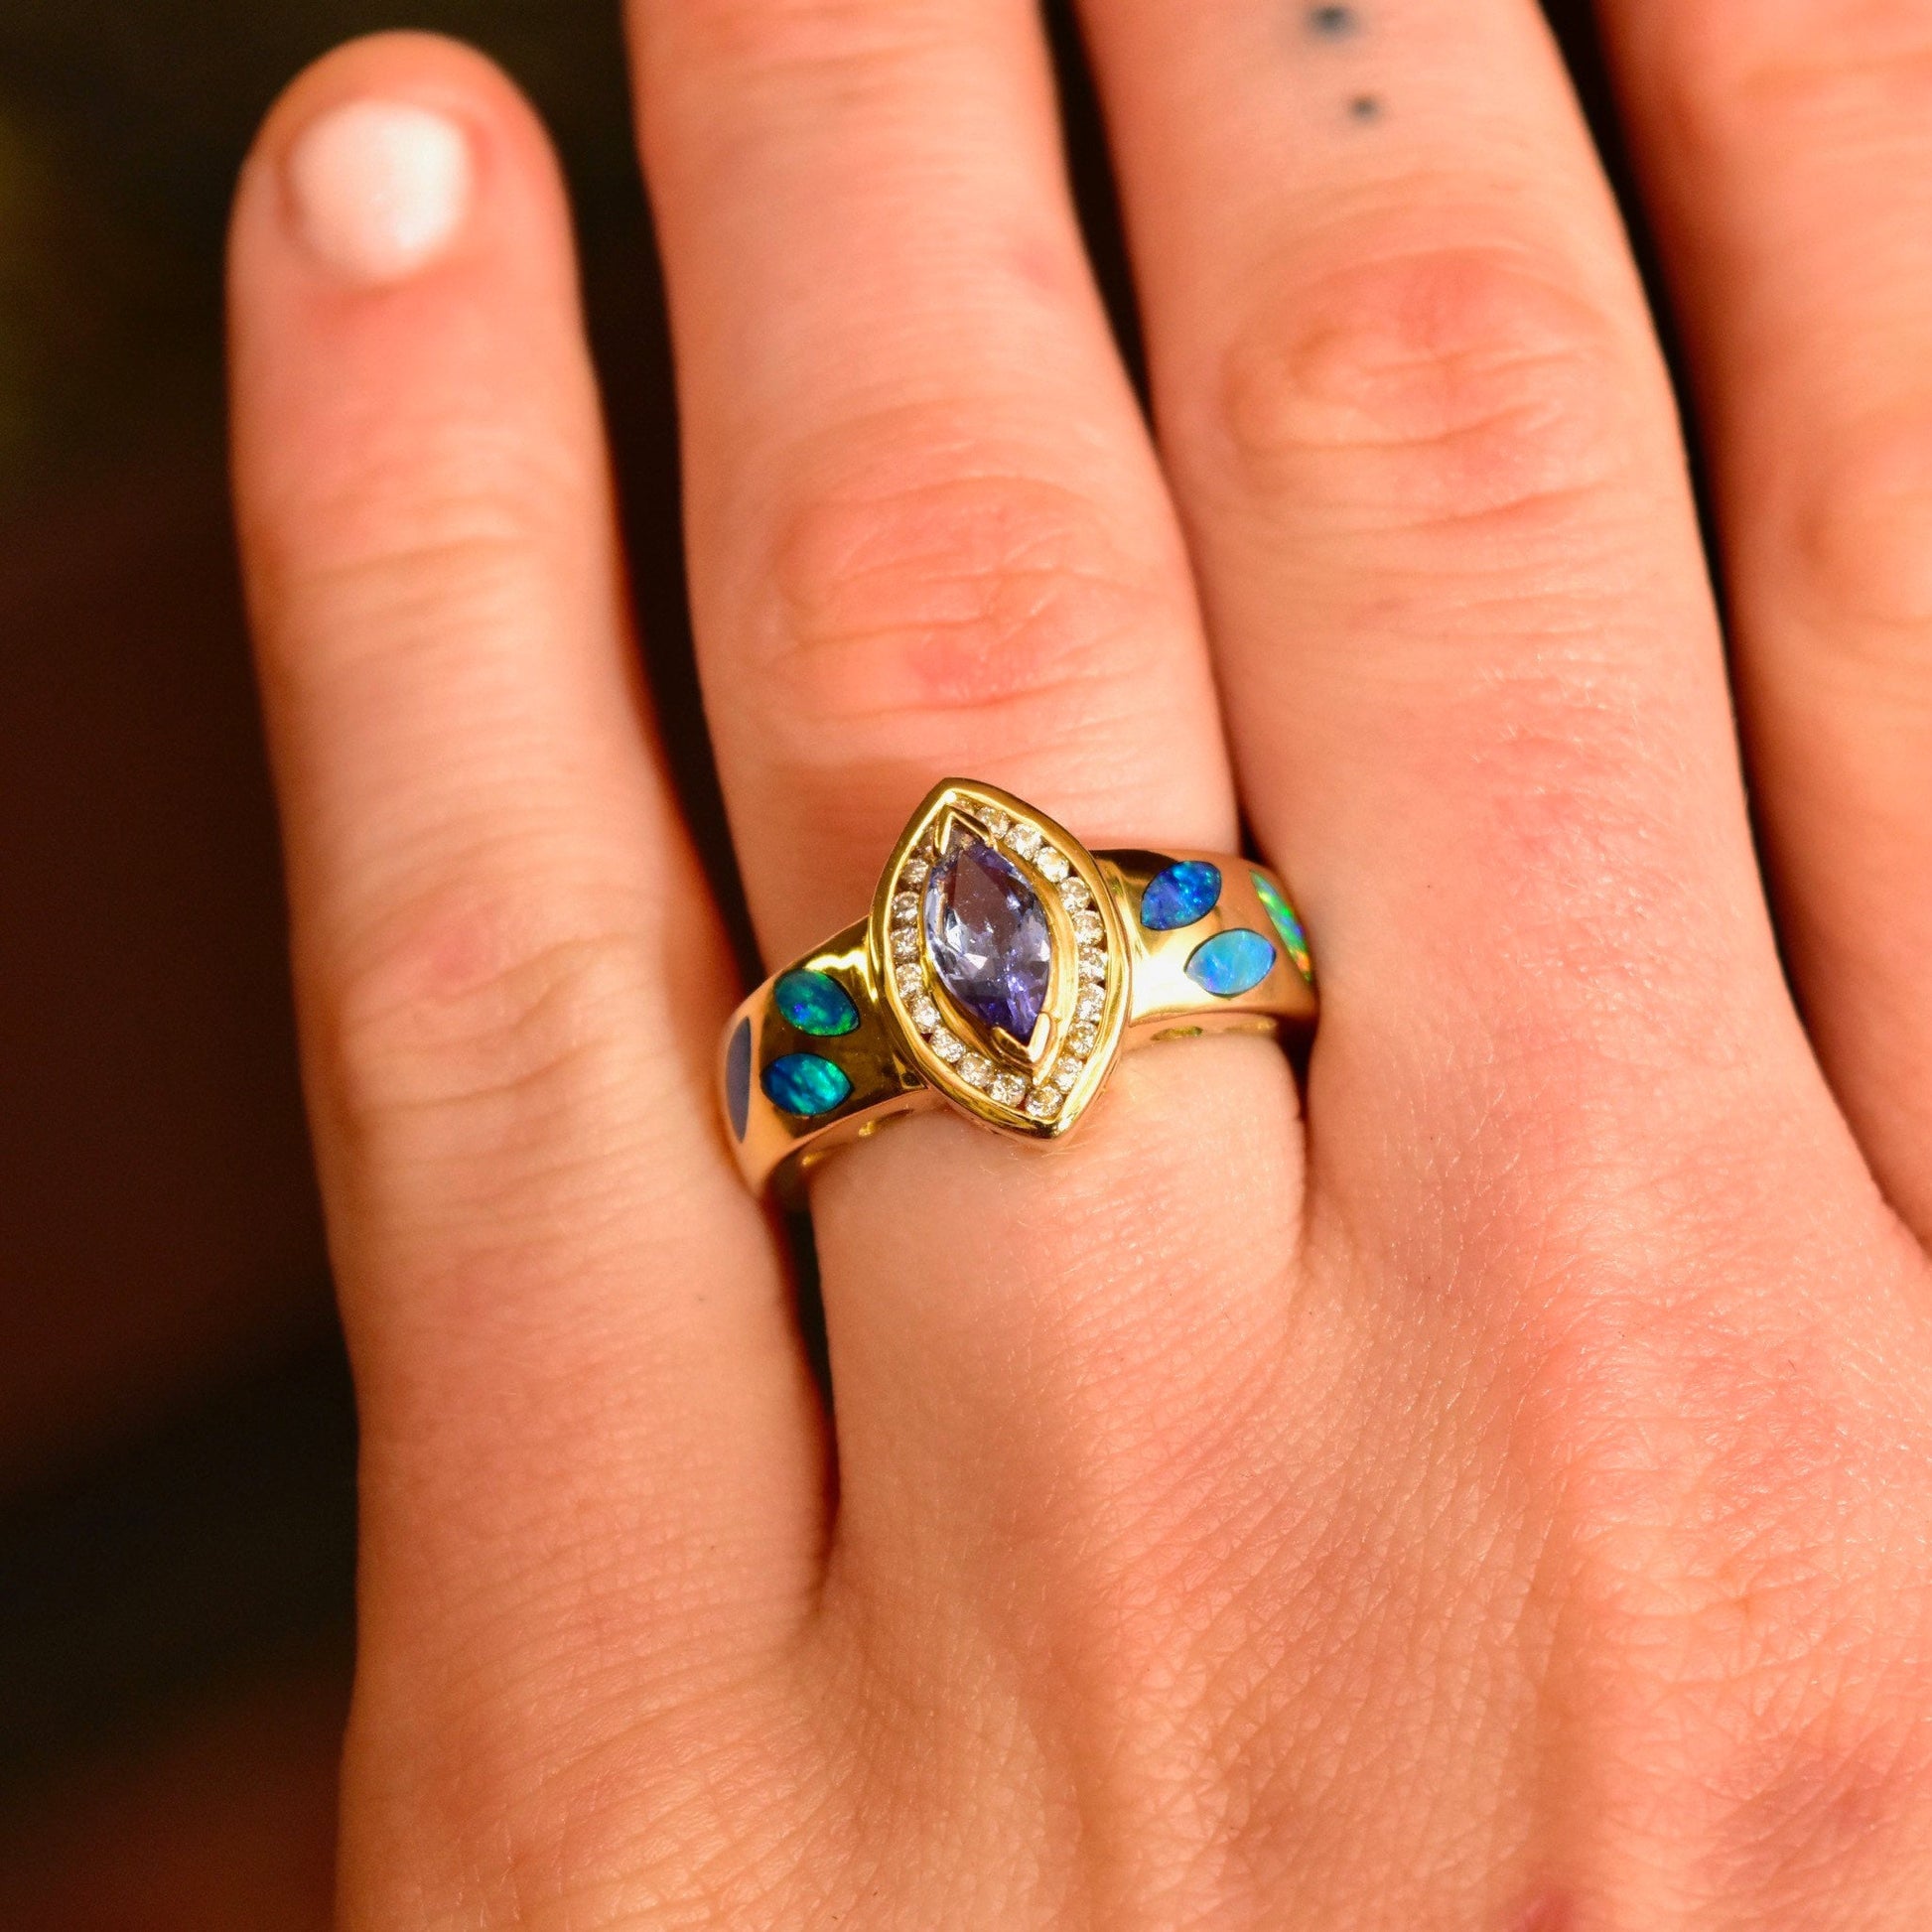 14K gold marquise tanzanite ring with diamond halo and blue opal inlay accents, worn on a finger against a plain background.